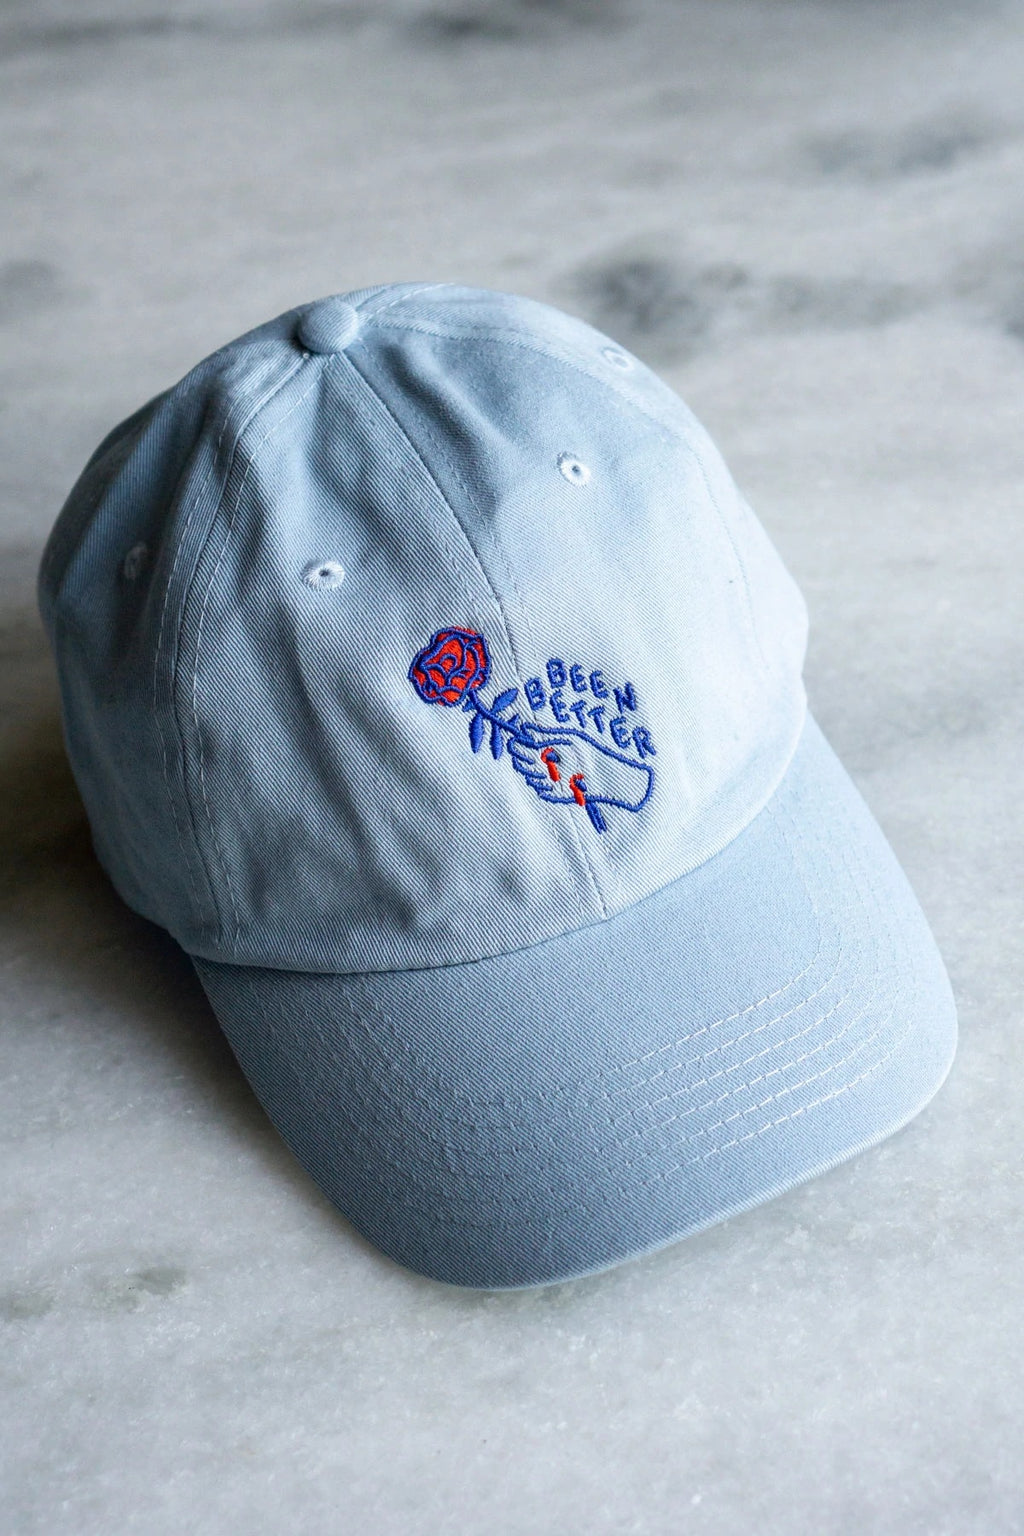 Stay Home Club - Been Better (Rose) Dad Hat